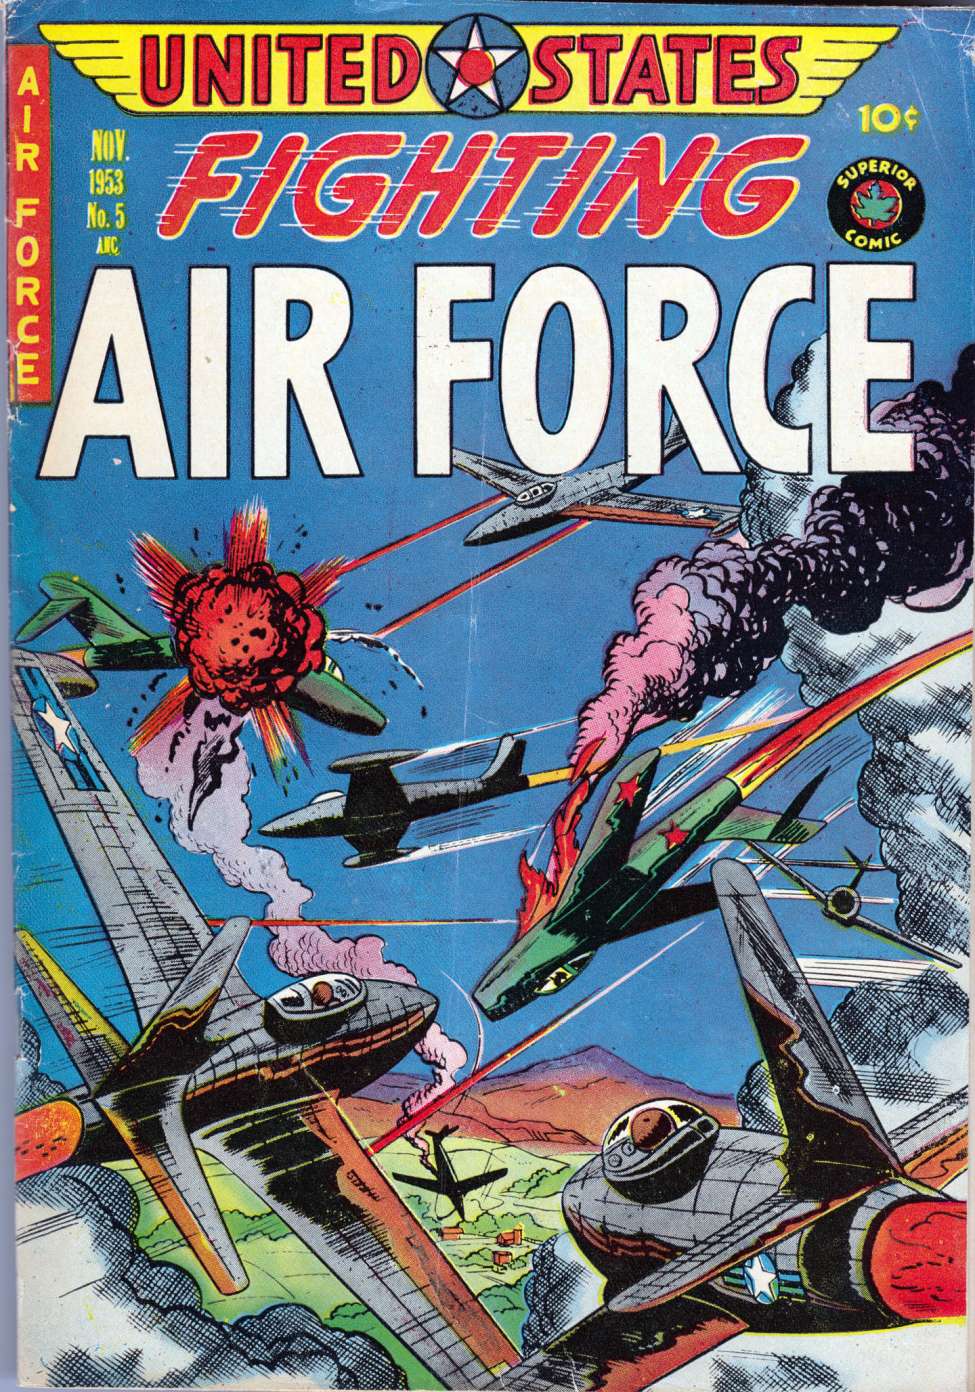 Comic Book Cover For U.S. Fighting Air Force 5